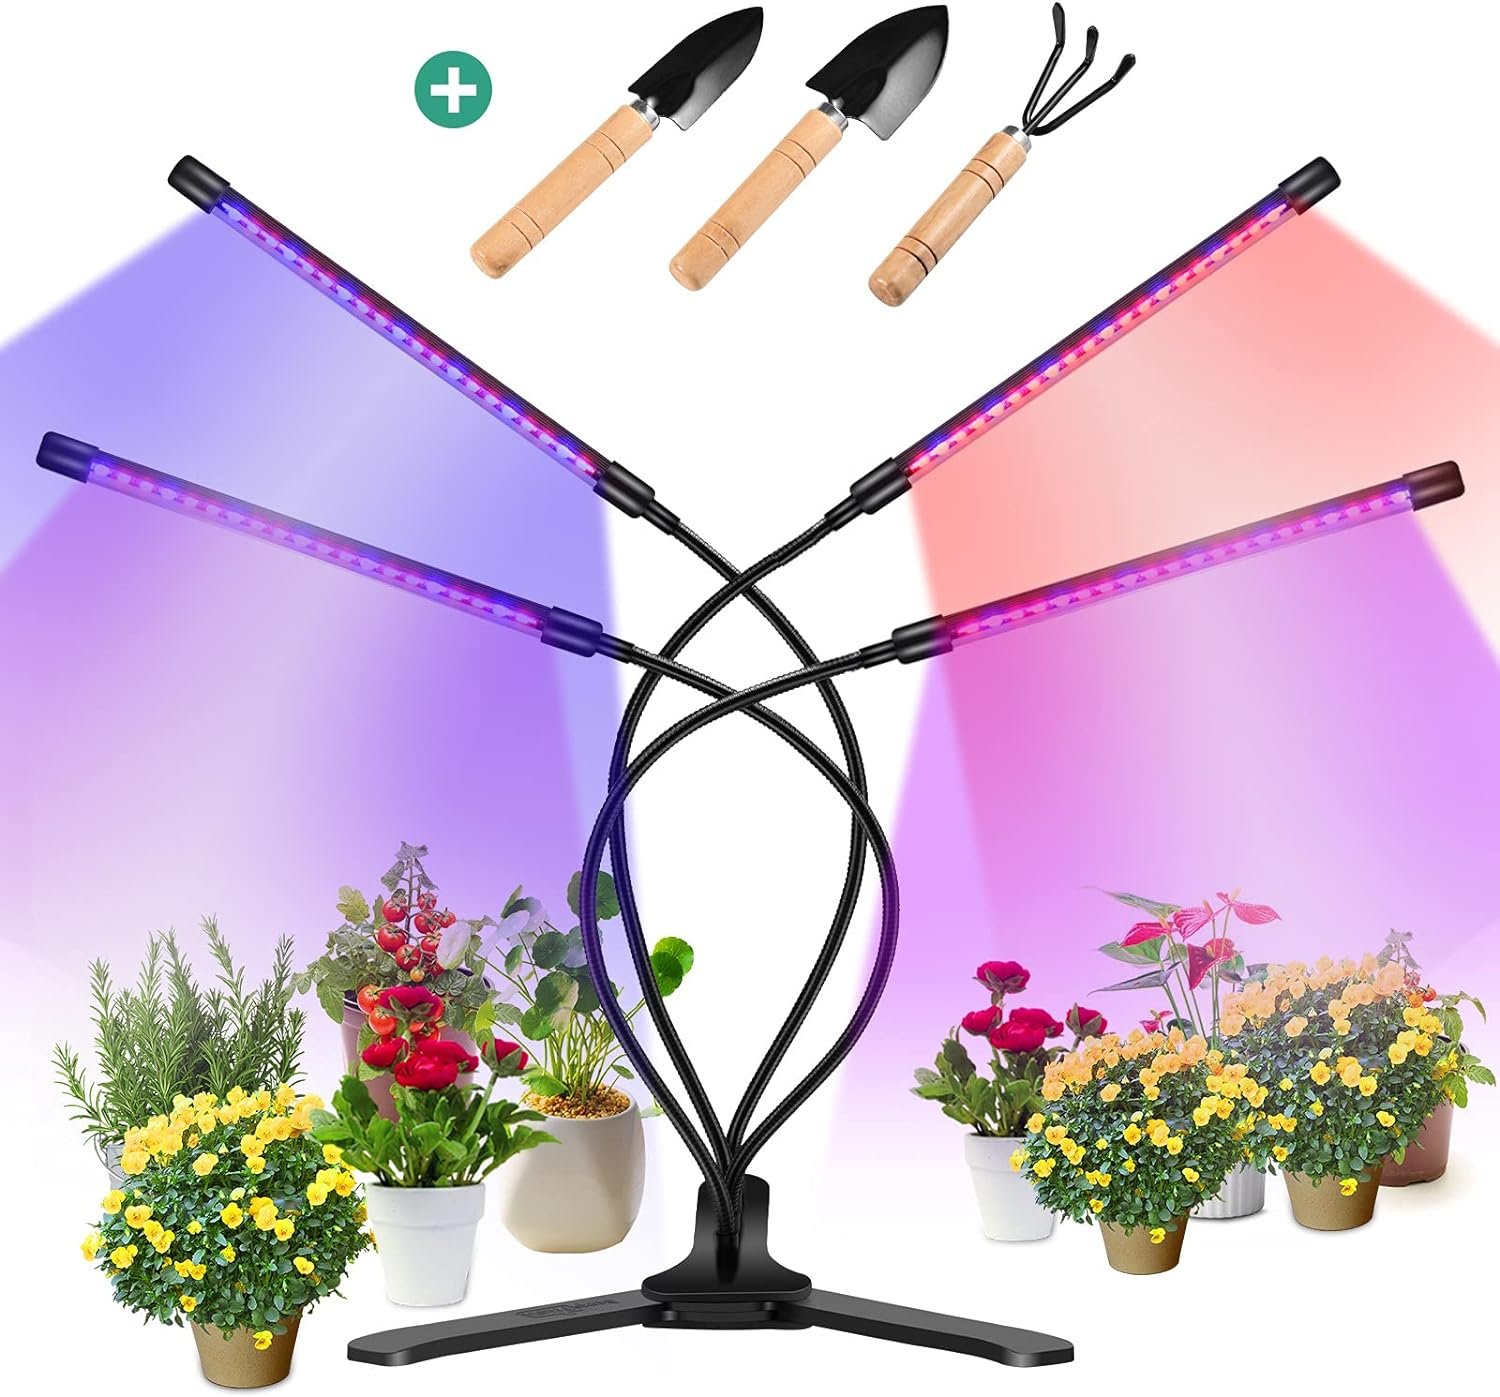 Grow Light for Indoor Plants - Adjustable LED Gooseneck Growing Light Strip,5V 3A Adapter Included,W/9 Dimmable Red Blue Spectrum 3 Modes Auto ON/Off 3/9/12H Timer for Flower Greenhouse